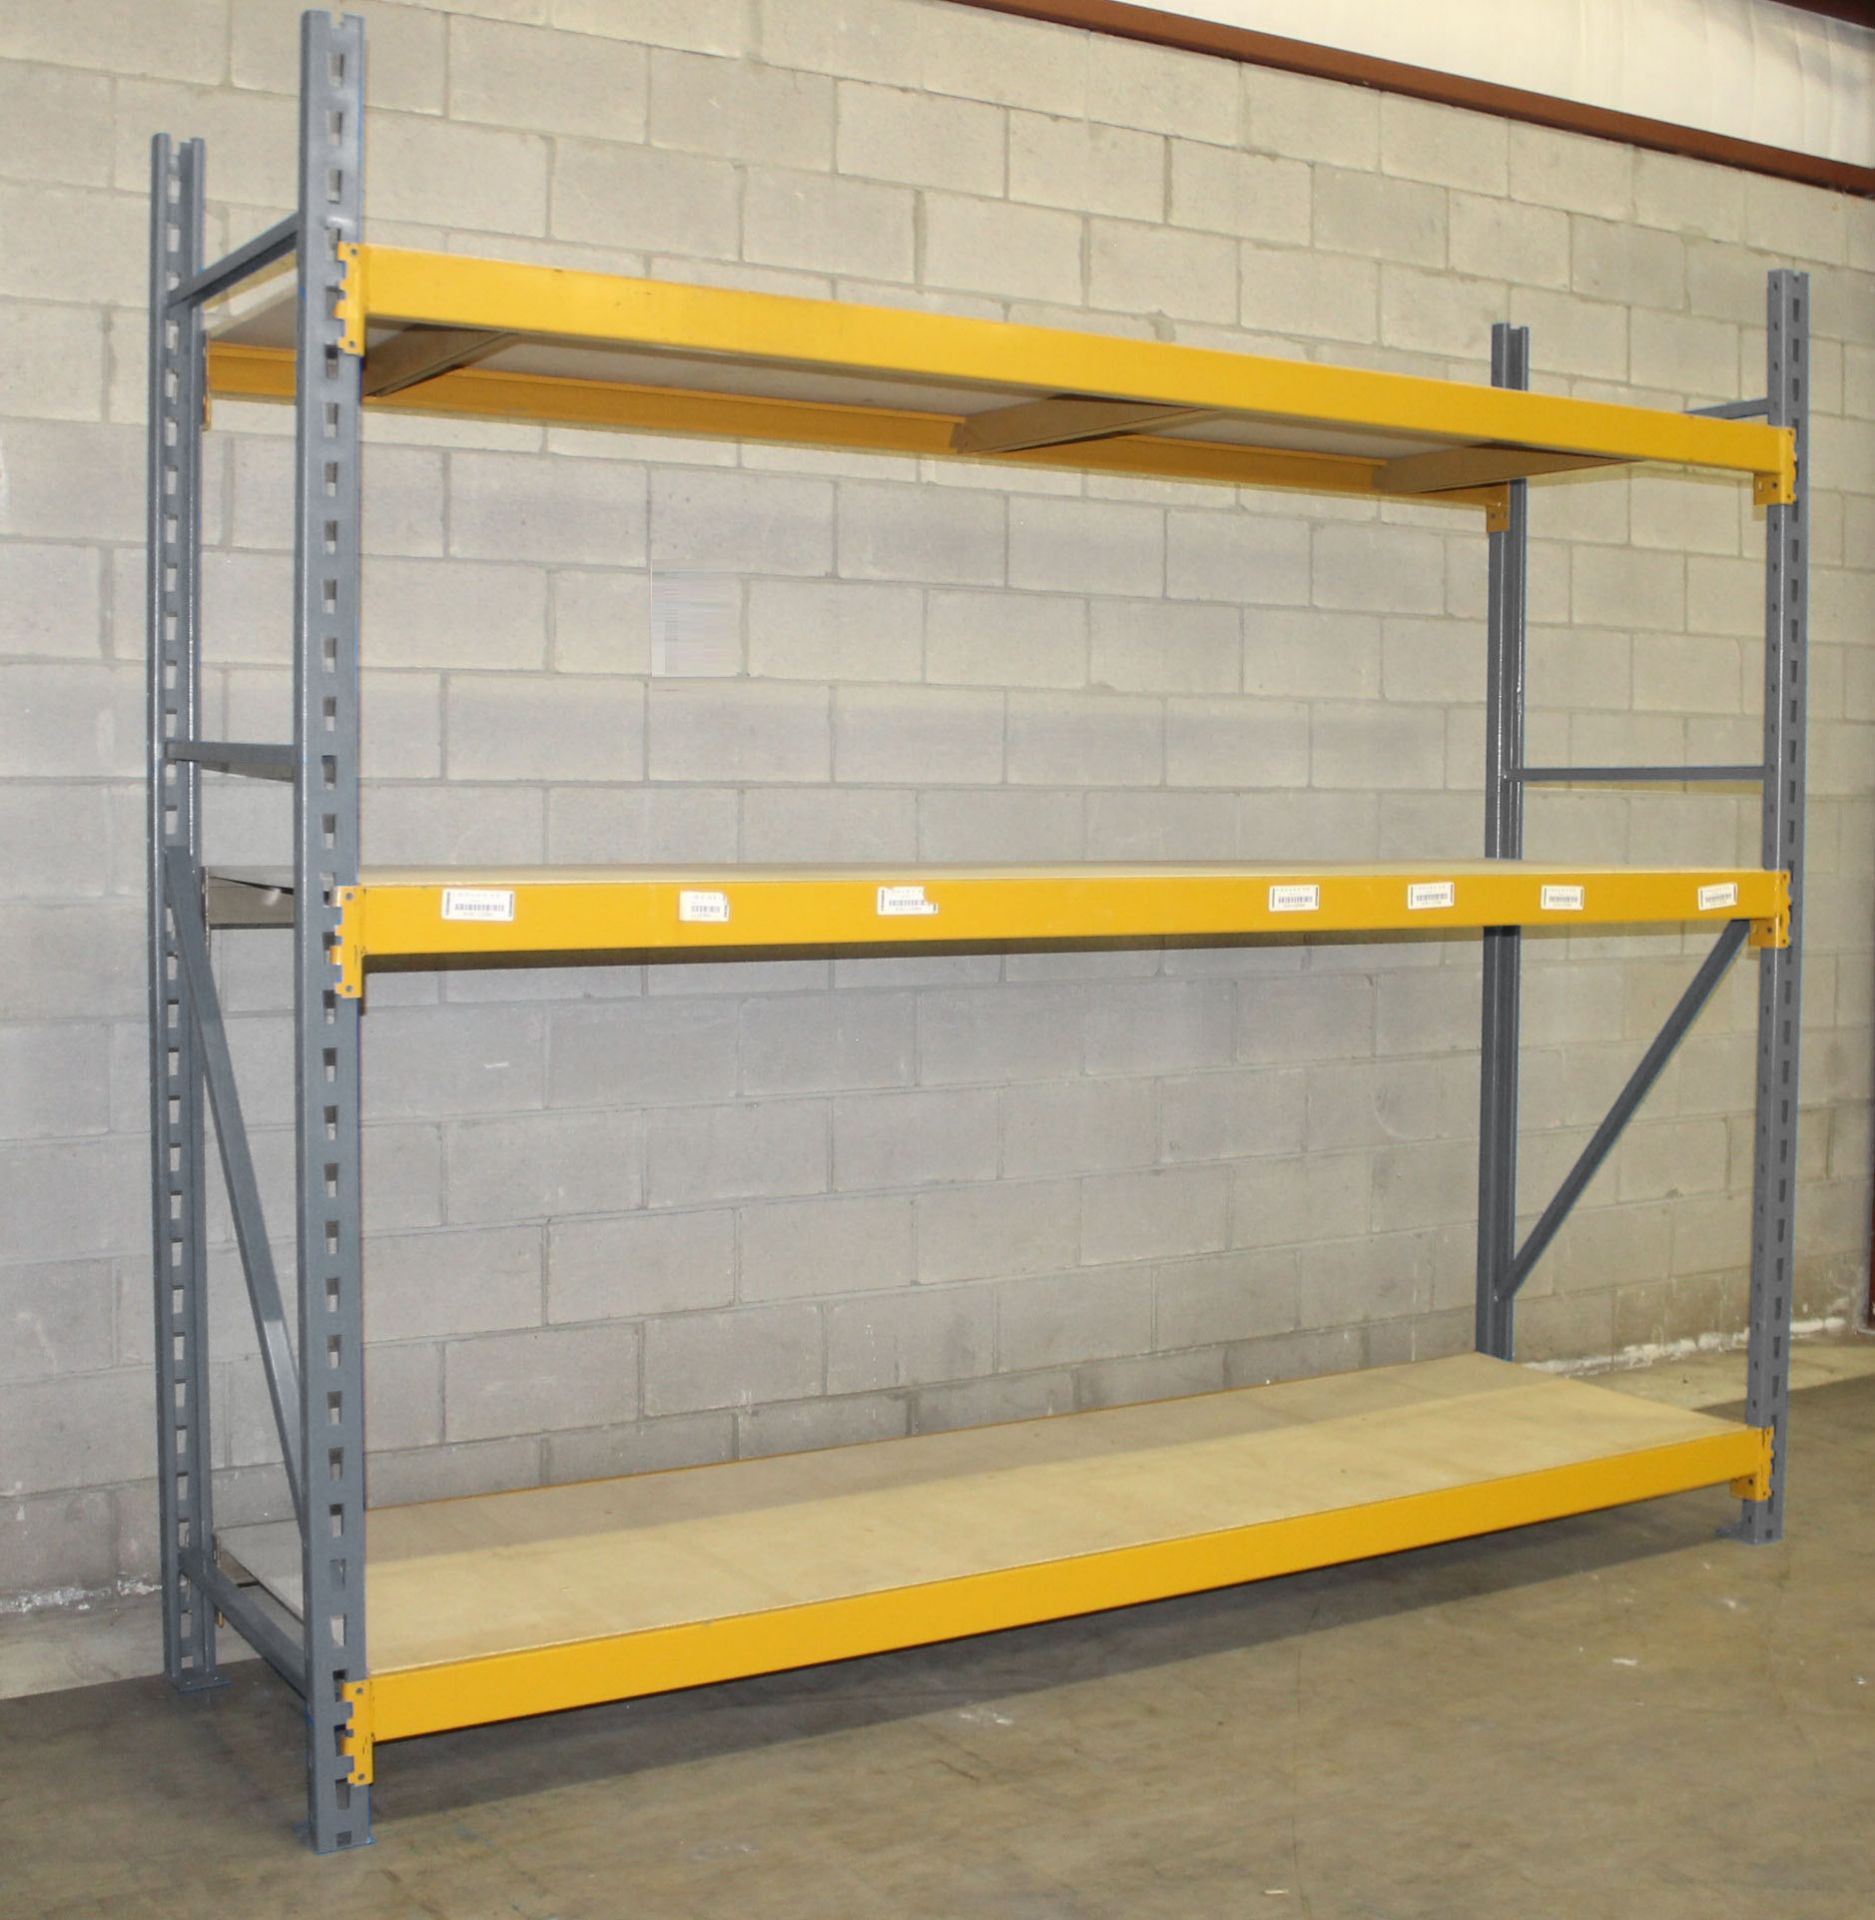 10 SECTIONS OF 96"H X 32"D X 108"L STOCK ROOM PALLET RACK SHELVING,  TOTAL 10 SECTIONS, 1 ROWS